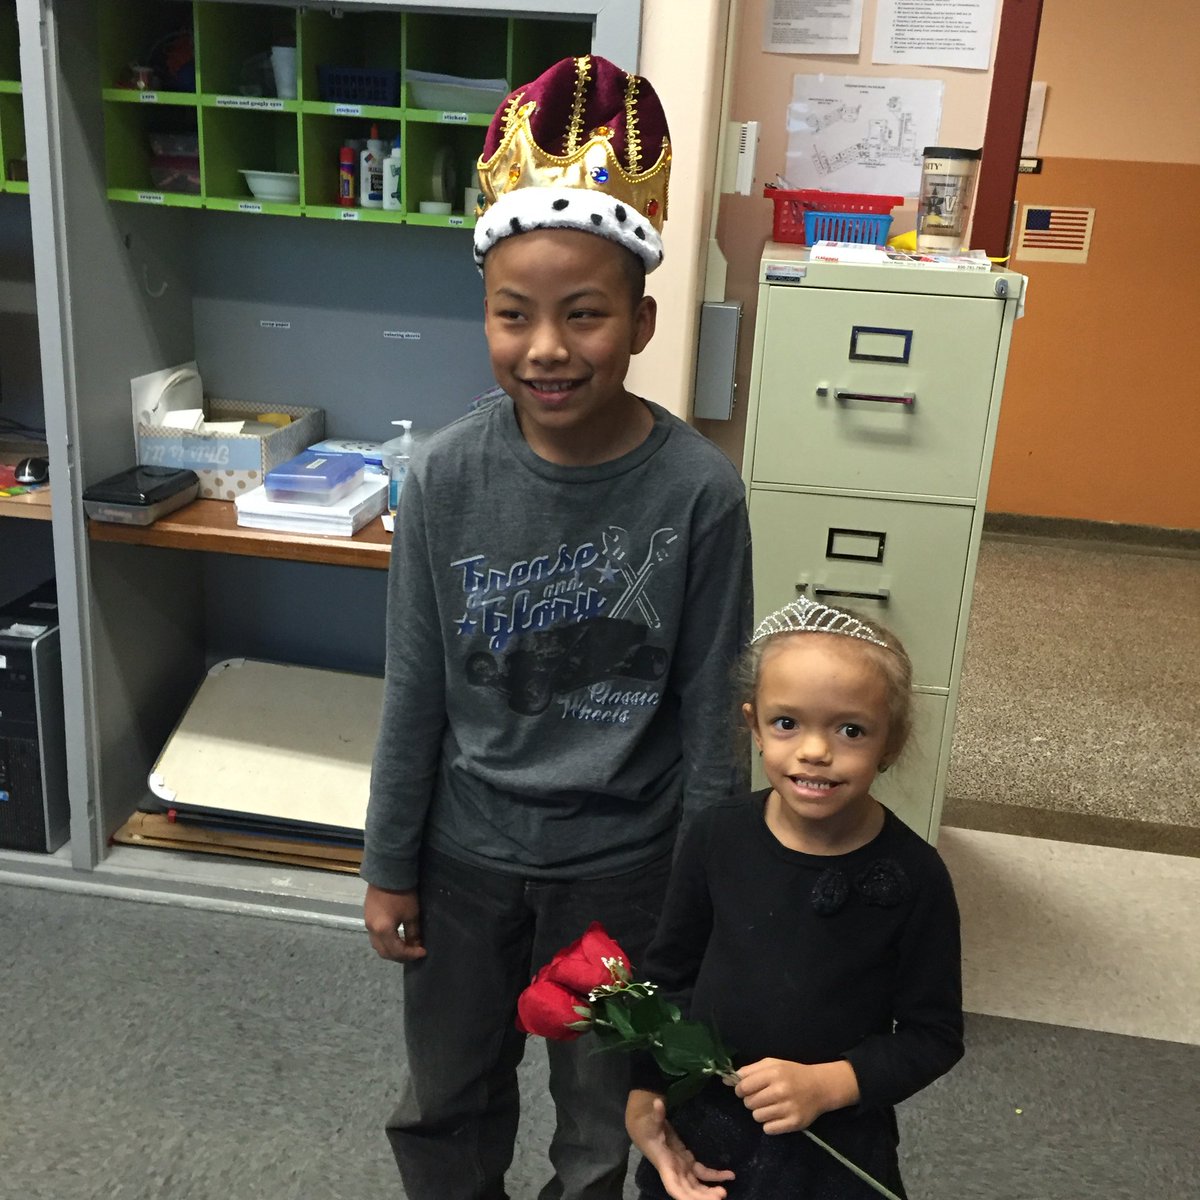 Crowned the Kingdom of Hearts Prince and Princess #Royalty #schoolfortheblind #studentcouncil #ValentinesDay